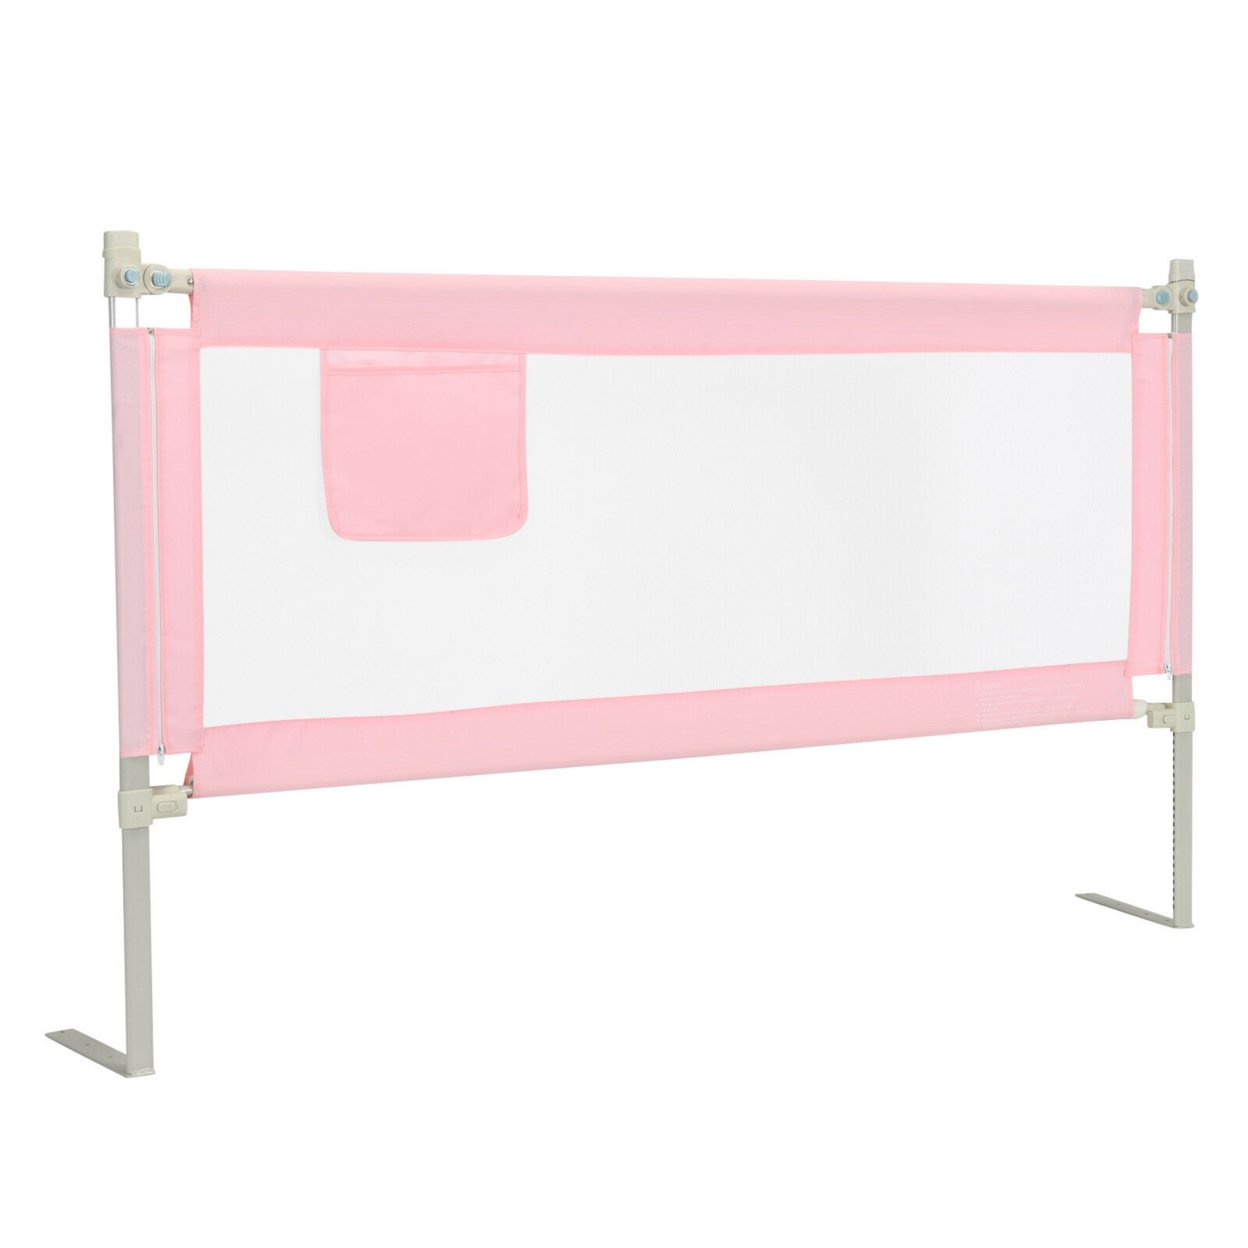 Gymax 69.5'' Bed Rails For Toddlers Vertical Lifting Baby Bed Rail Guard With Lock Grey / Pink - Blue